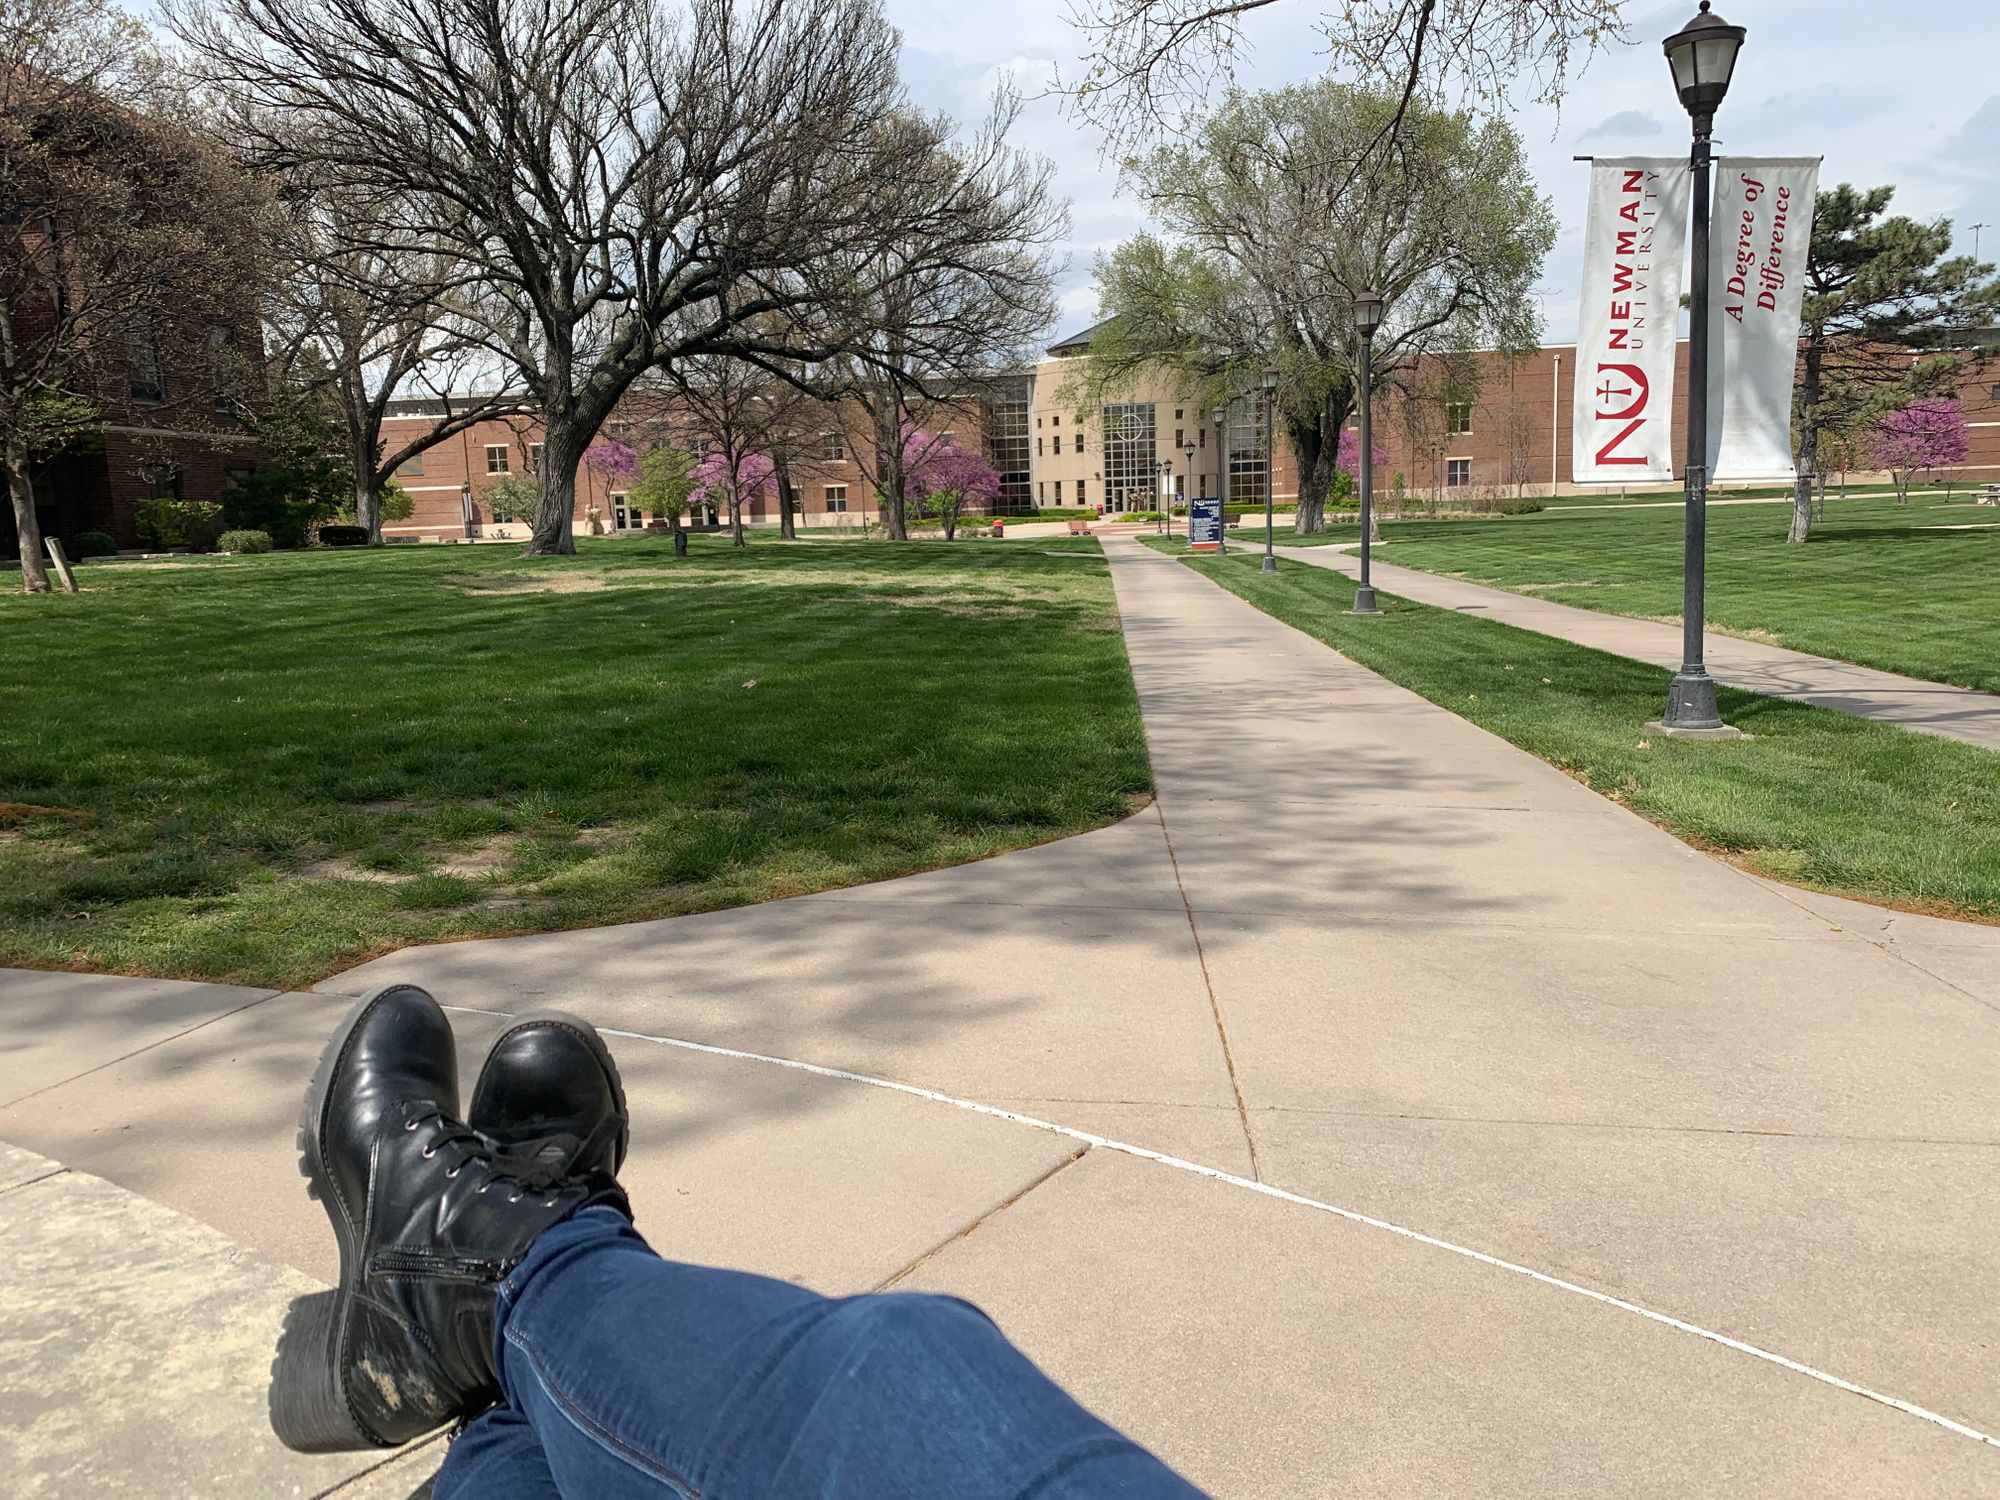 Lessons I learned from staying at a lonely campus during a pandemic